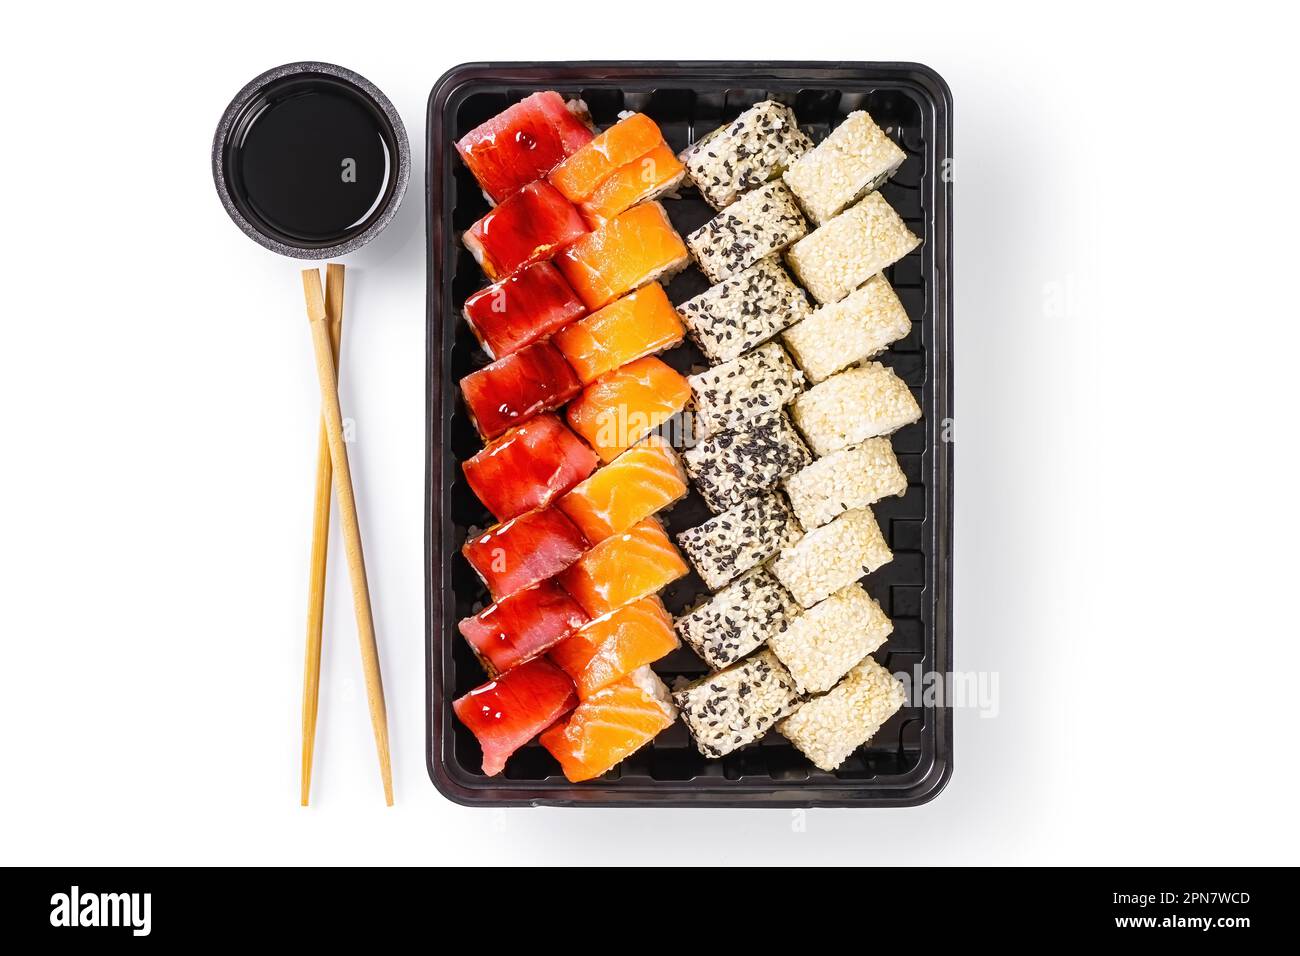 https://c8.alamy.com/comp/2PN7WCD/sushi-set-with-wasabi-ginger-and-soy-sauce-served-in-plastic-box-takeaway-to-go-assorted-of-japanese-sushi-with-tuna-salmon-sesame-isolated-on-wh-2PN7WCD.jpg